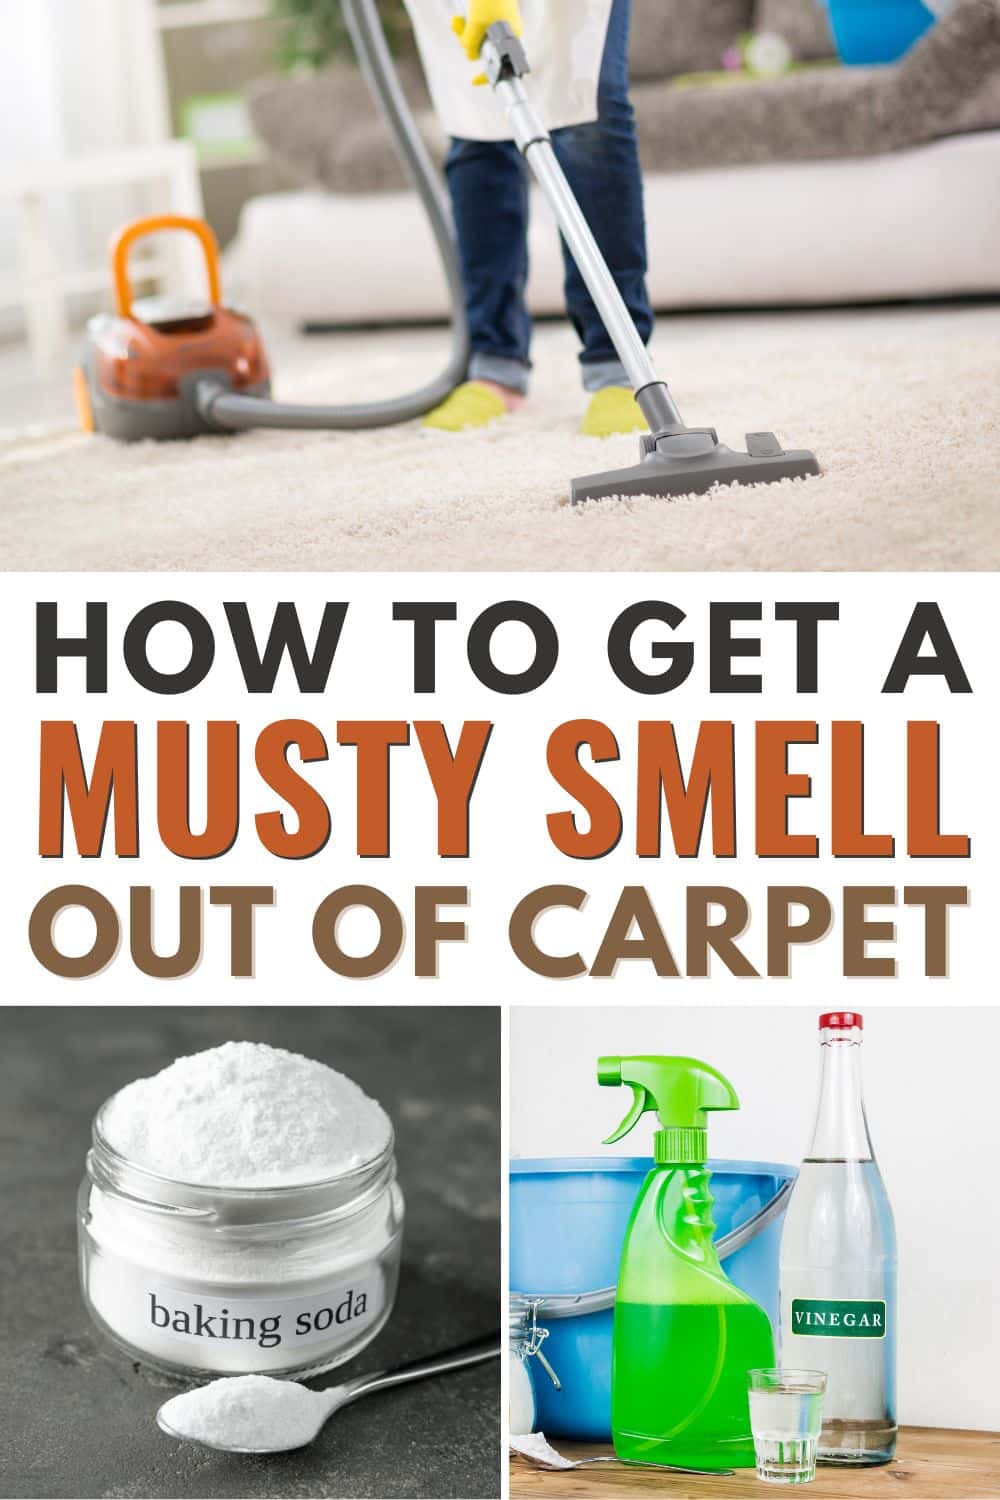 How to get a musty smell out of carpet.